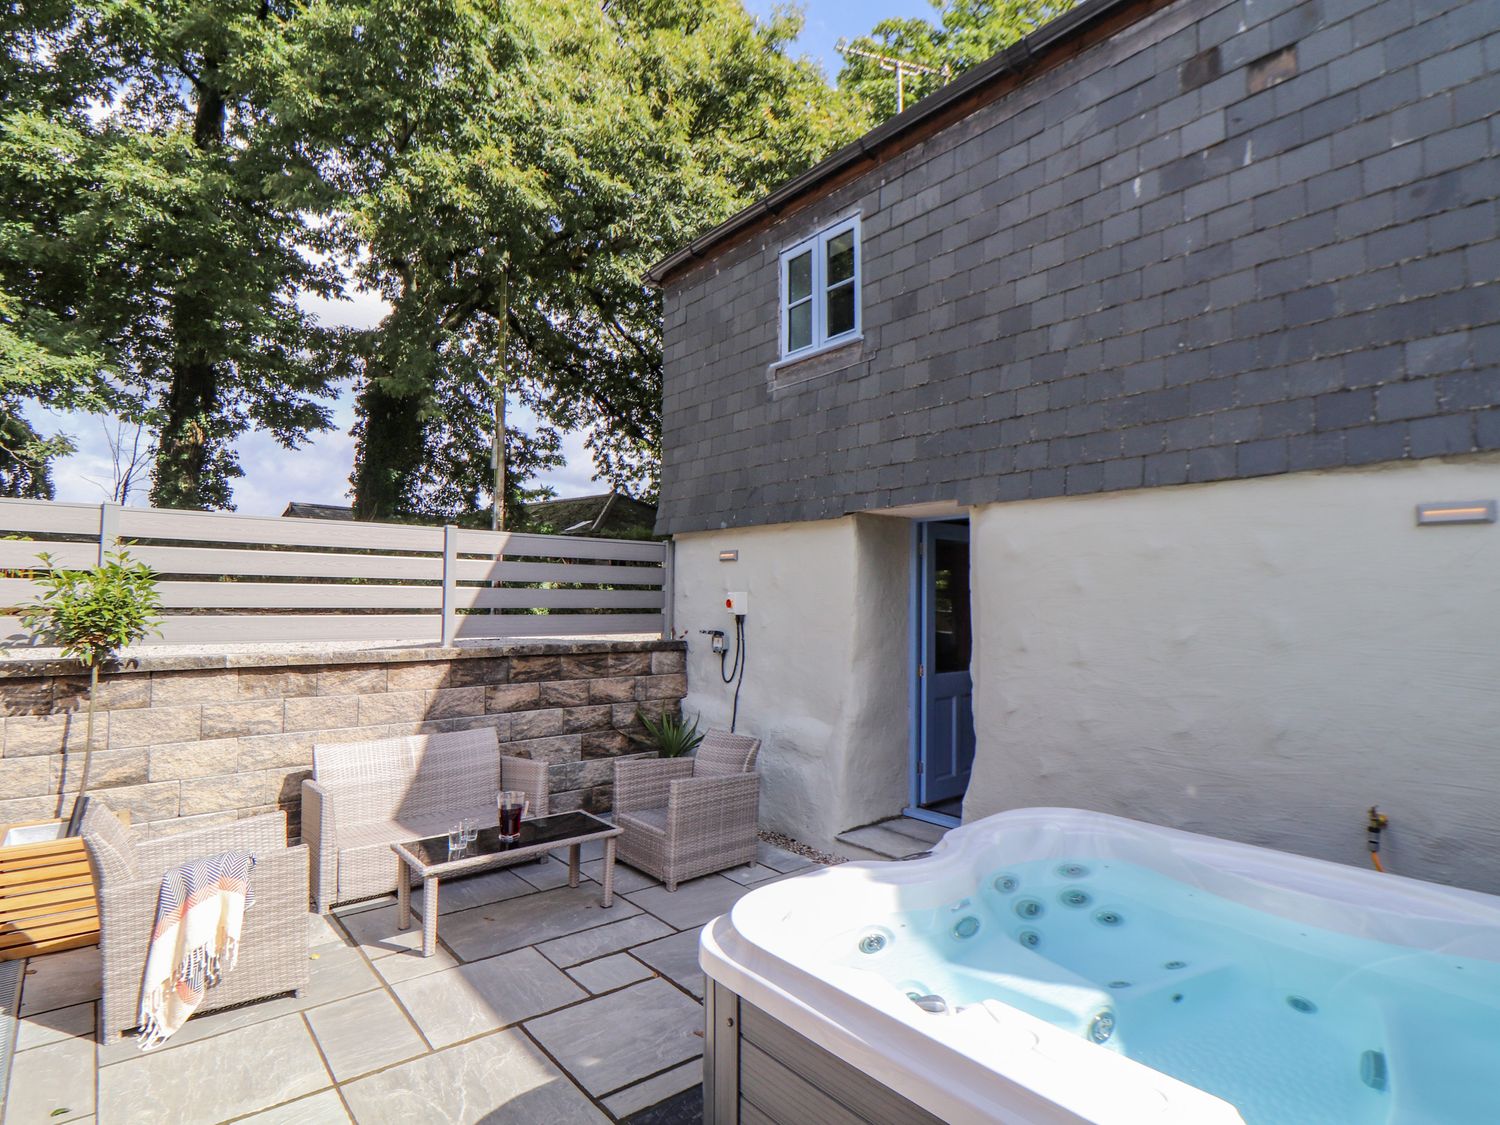 St Keverne, Tresooth Cottages - Cornwall - 1116328 - photo 1